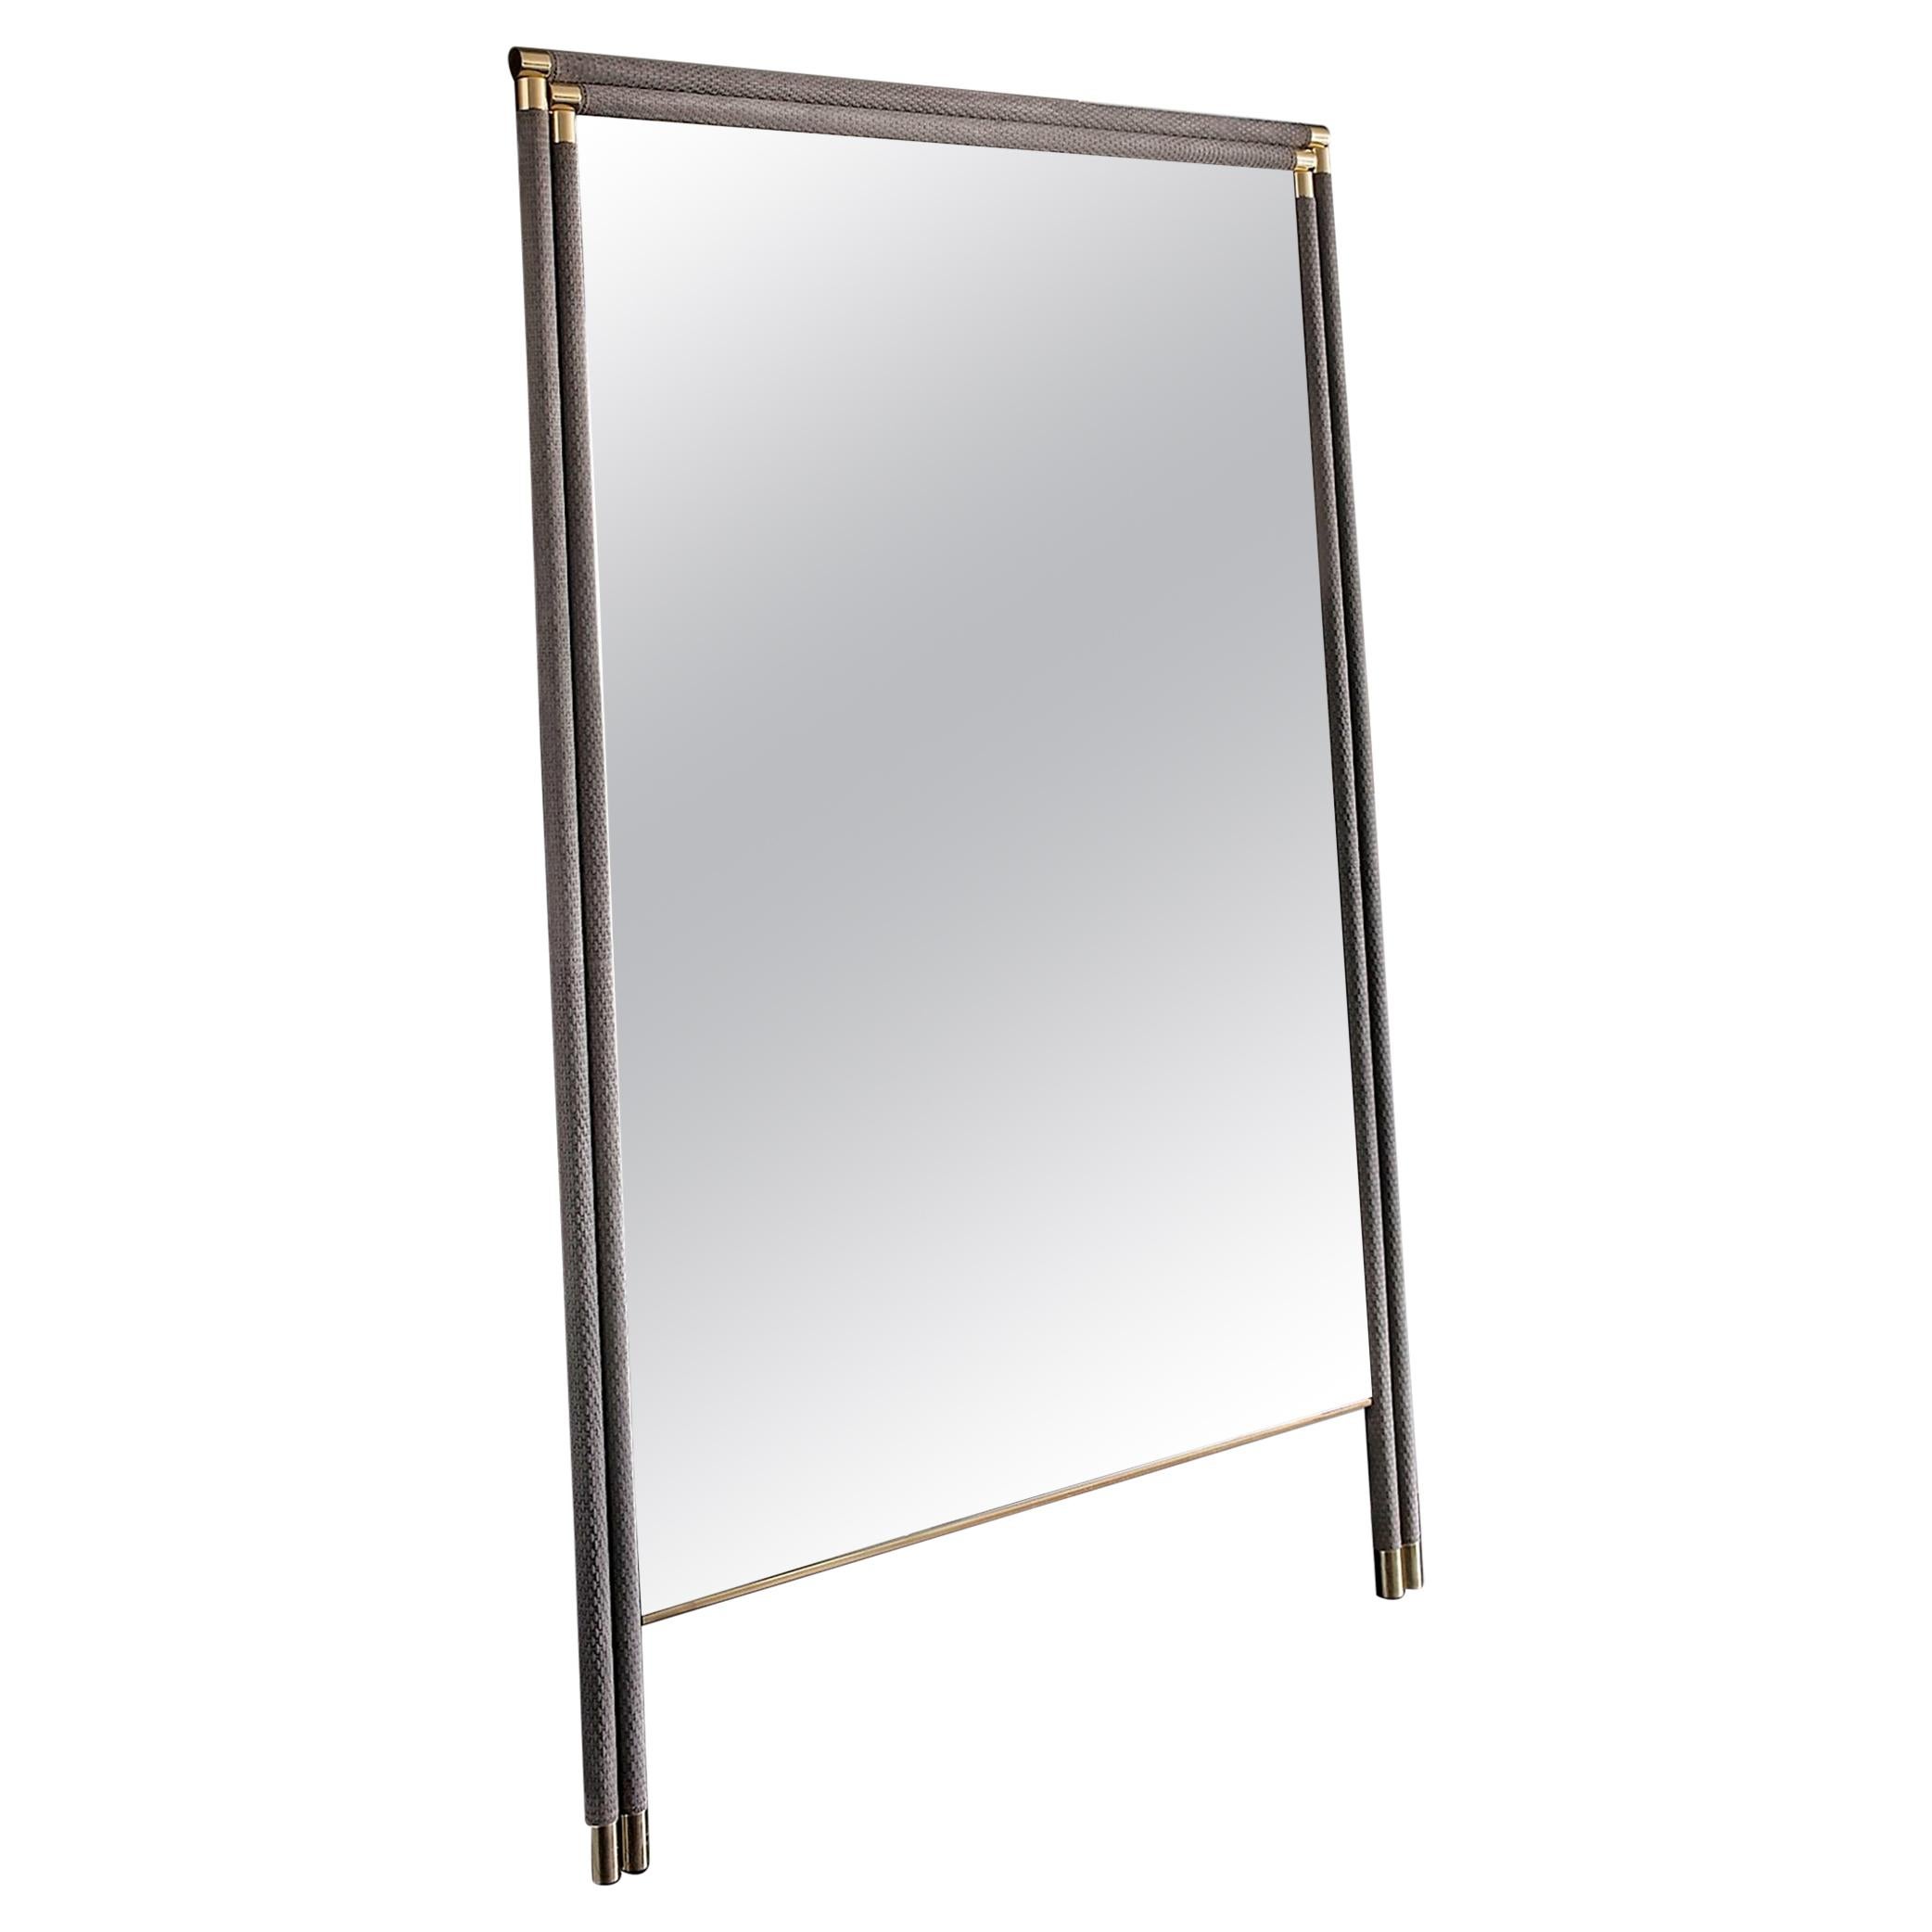 Floor Smart Mirror with Genuine Leather Frame For Sale